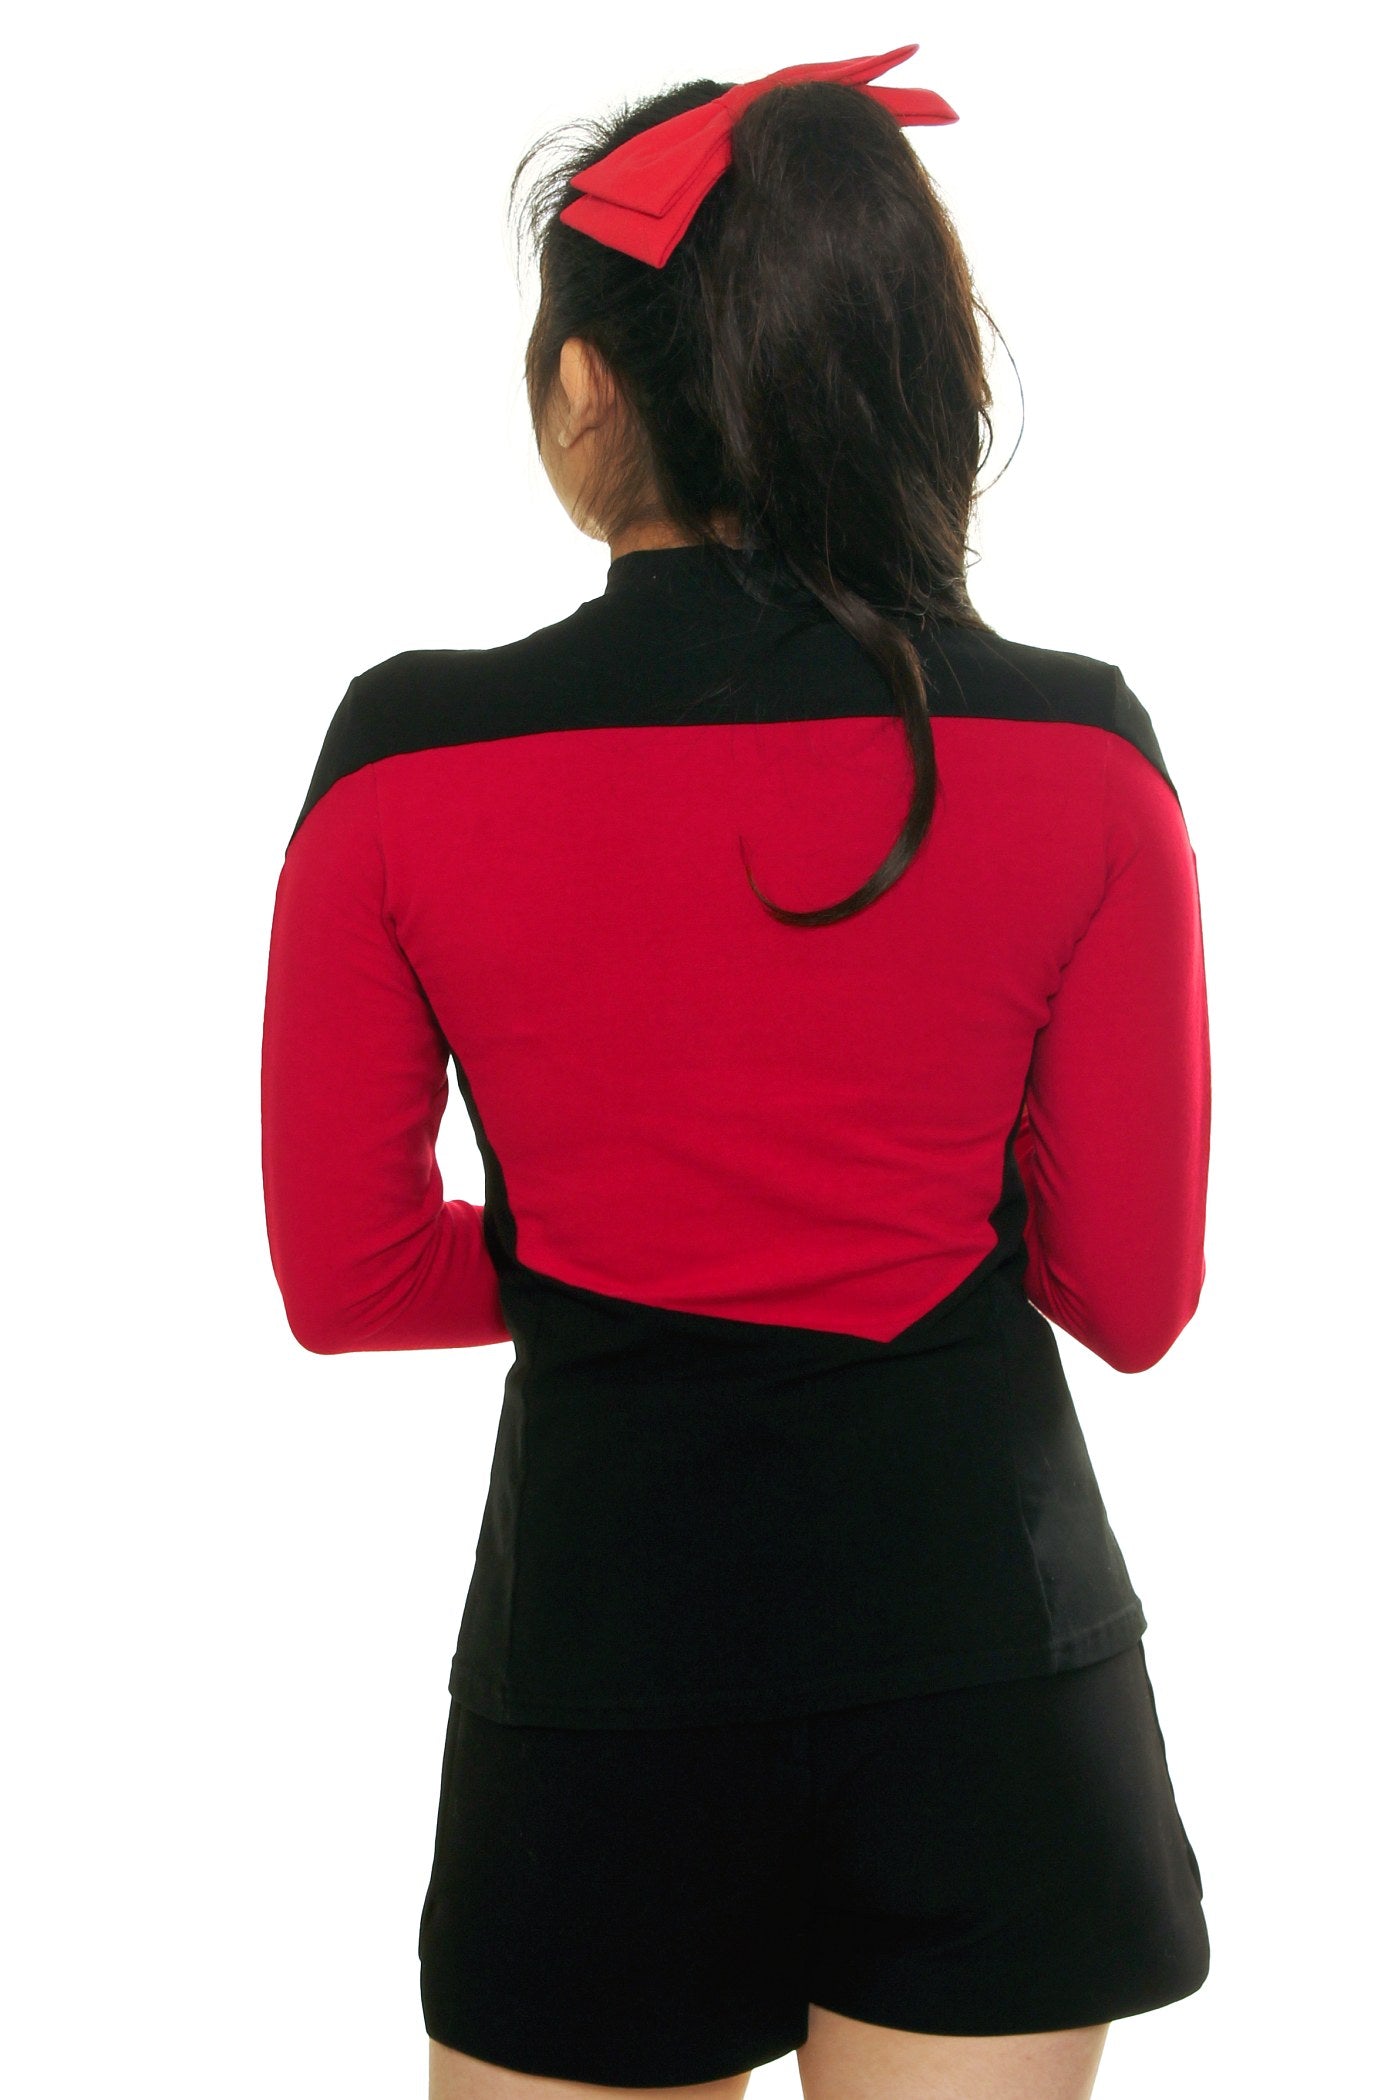 PRE-ORDER: Generation Mod Top in Red